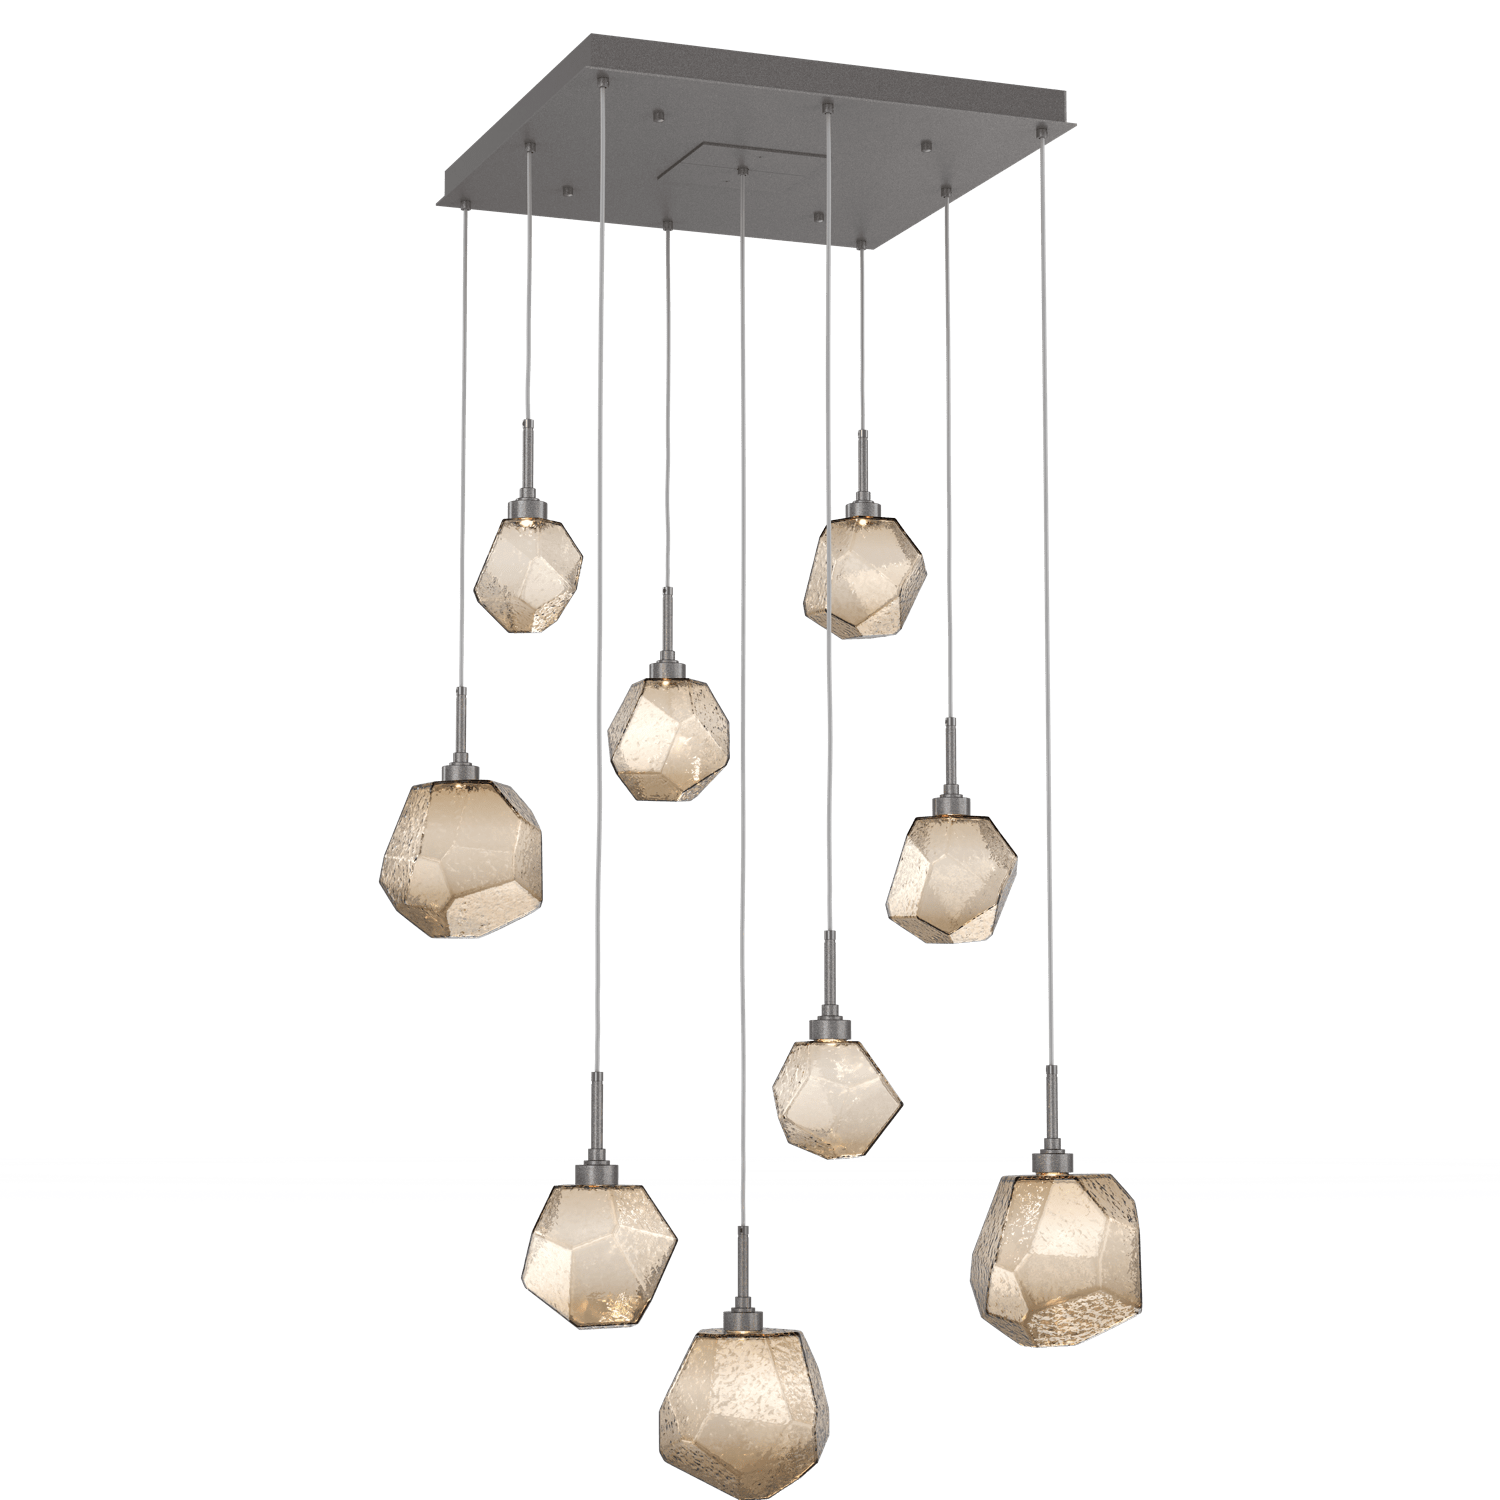 CHB0039-09-GP-B-Hammerton-Studio-Gem-9-light-square-pendant-chandelier-with-graphite-finish-and-bronze-blown-glass-shades-and-LED-lamping